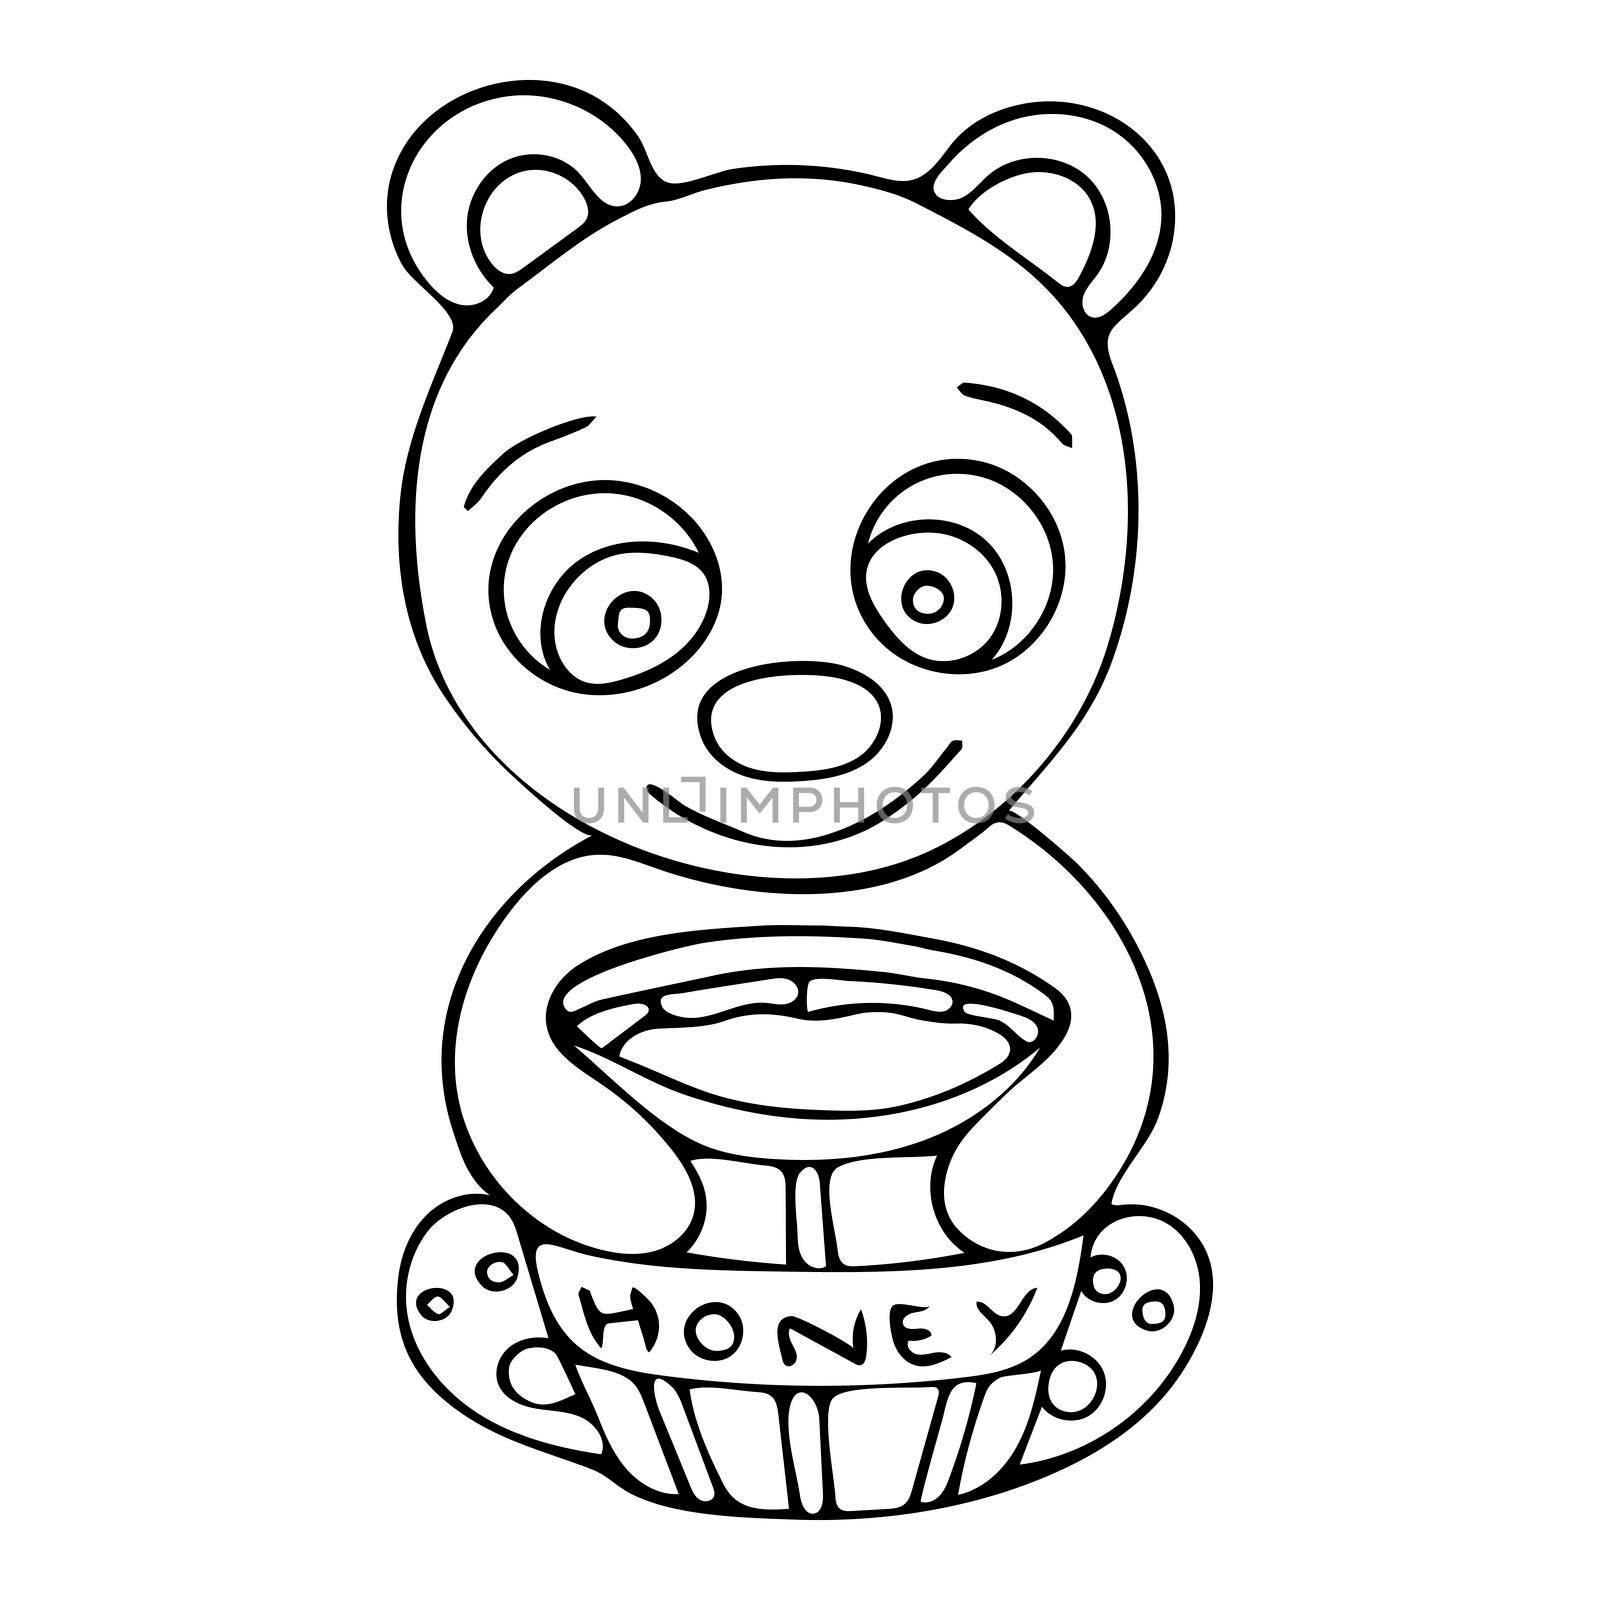 Black And White Bear With Honey Doodle Sketch. Hand-Drawn Isolated Illustration On White Background. Illustration For Kid Coloring Book, Coloring Page, Design, T-Shirt And Print.